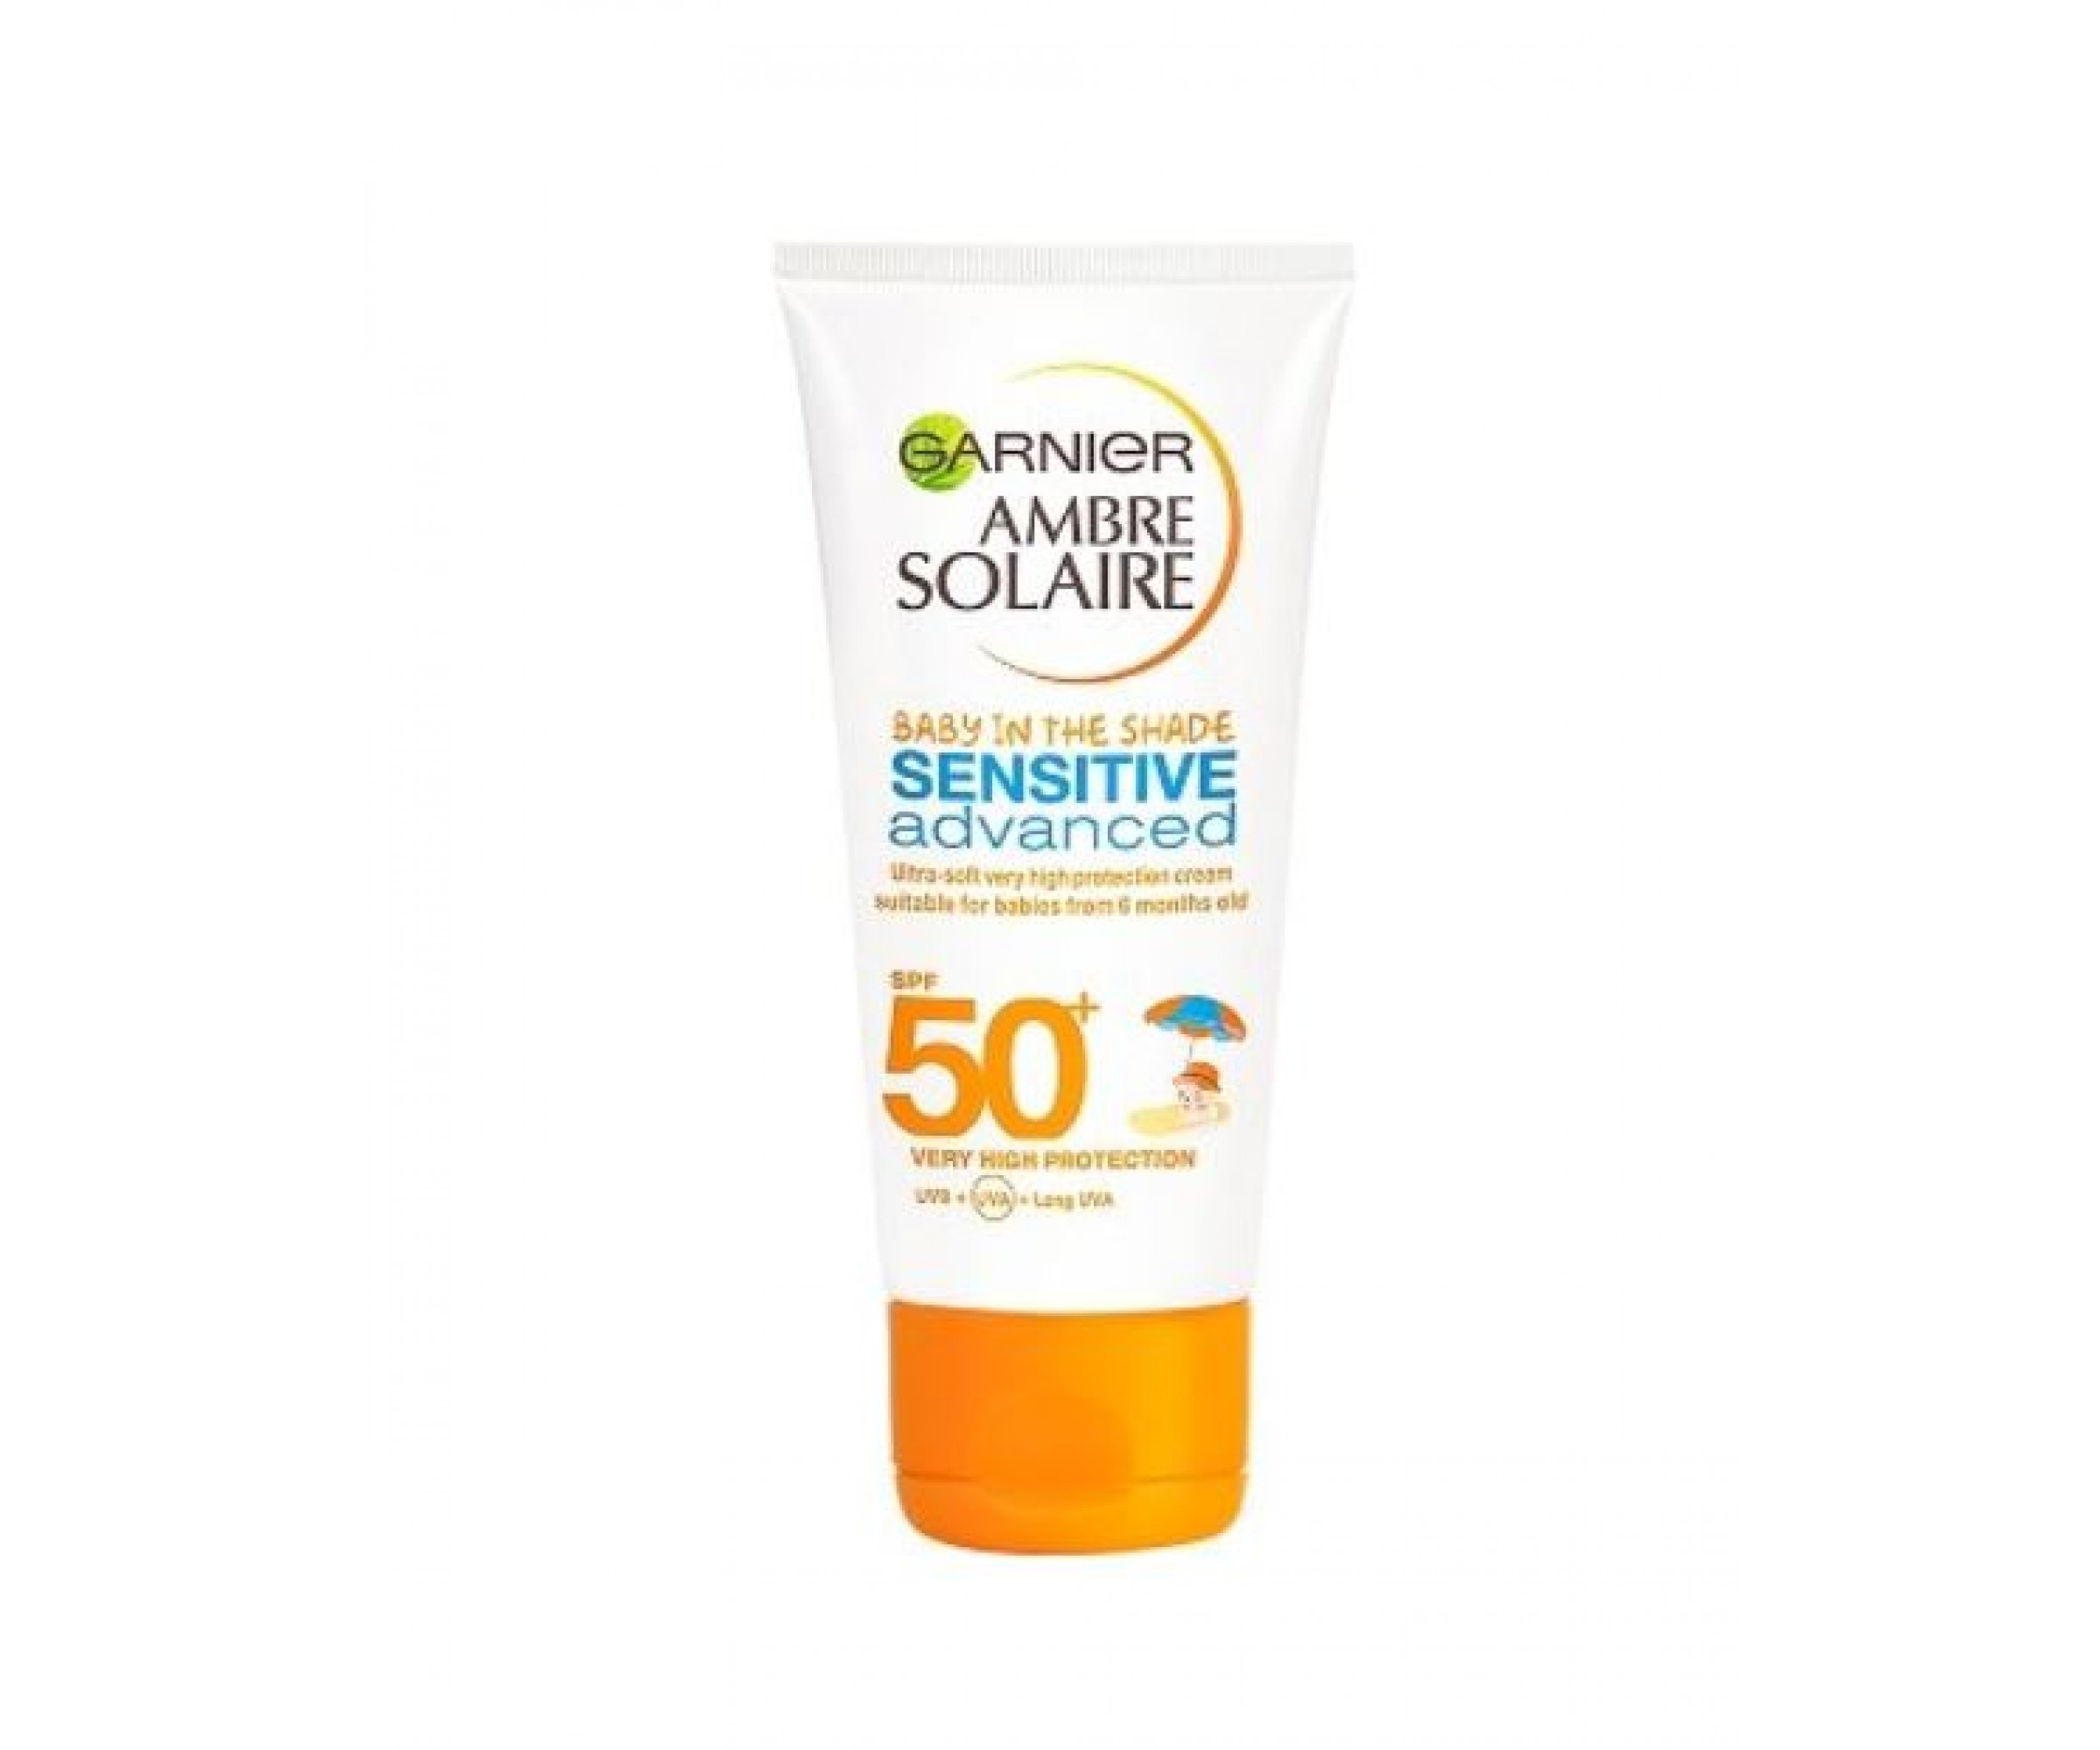 Garnier Ambre Solaire Baby in the Shade - SPF 50+